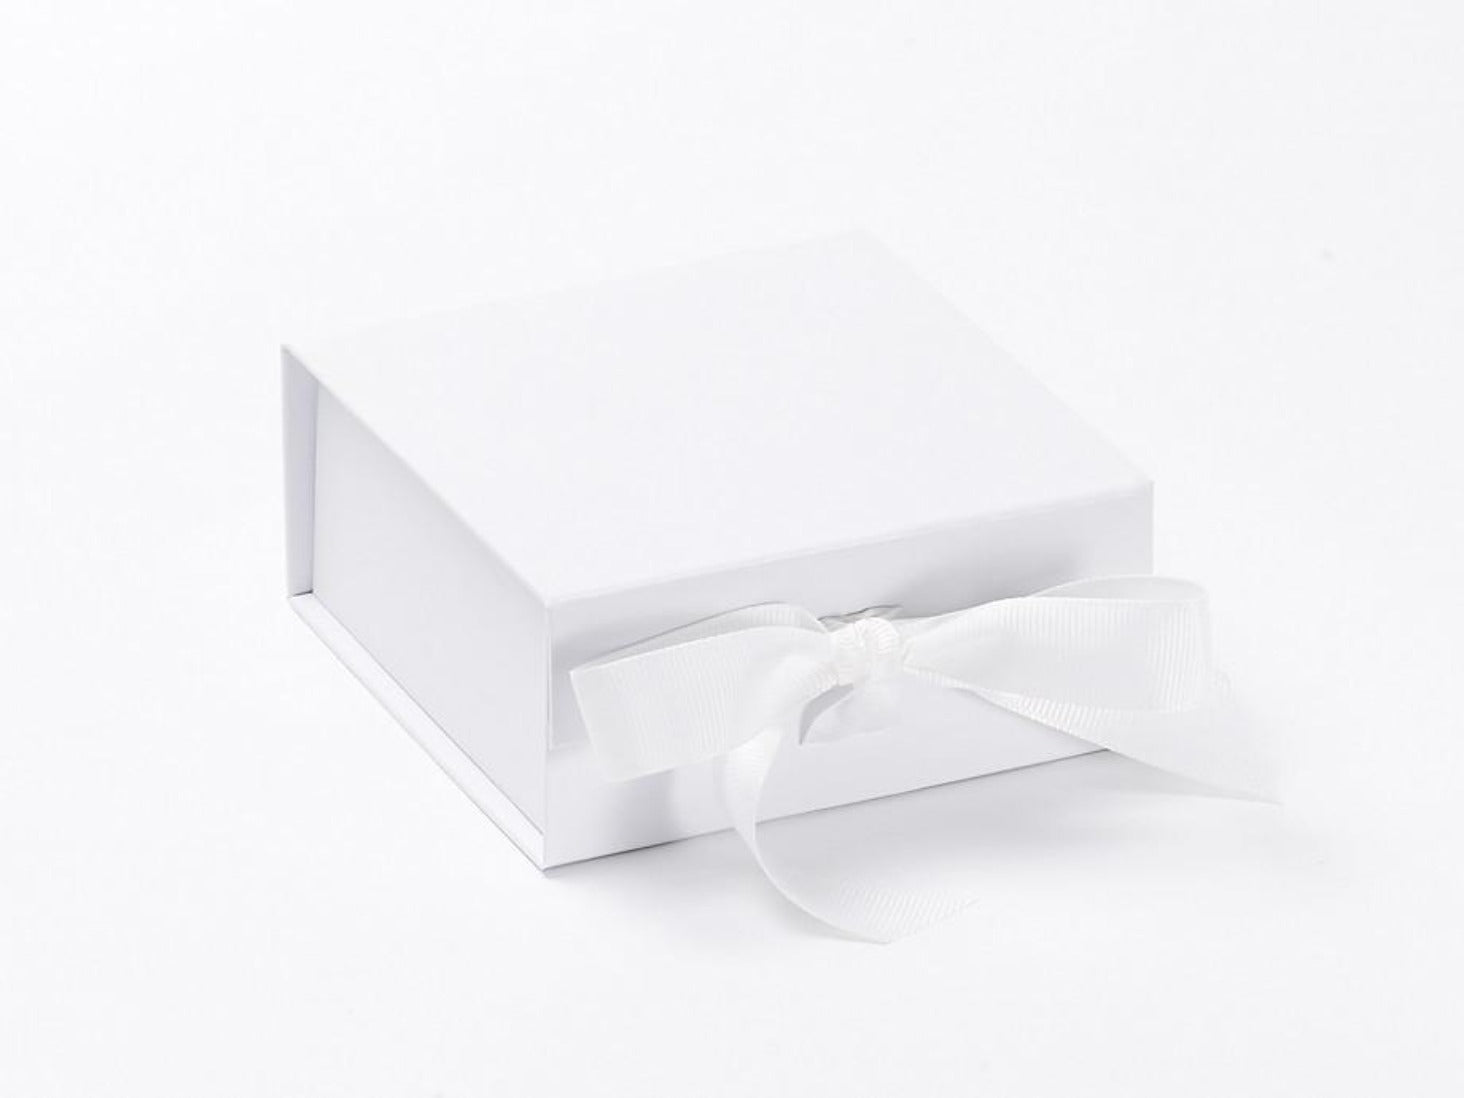 Small white gift box with fixed ribbon ties from Foldabox USA